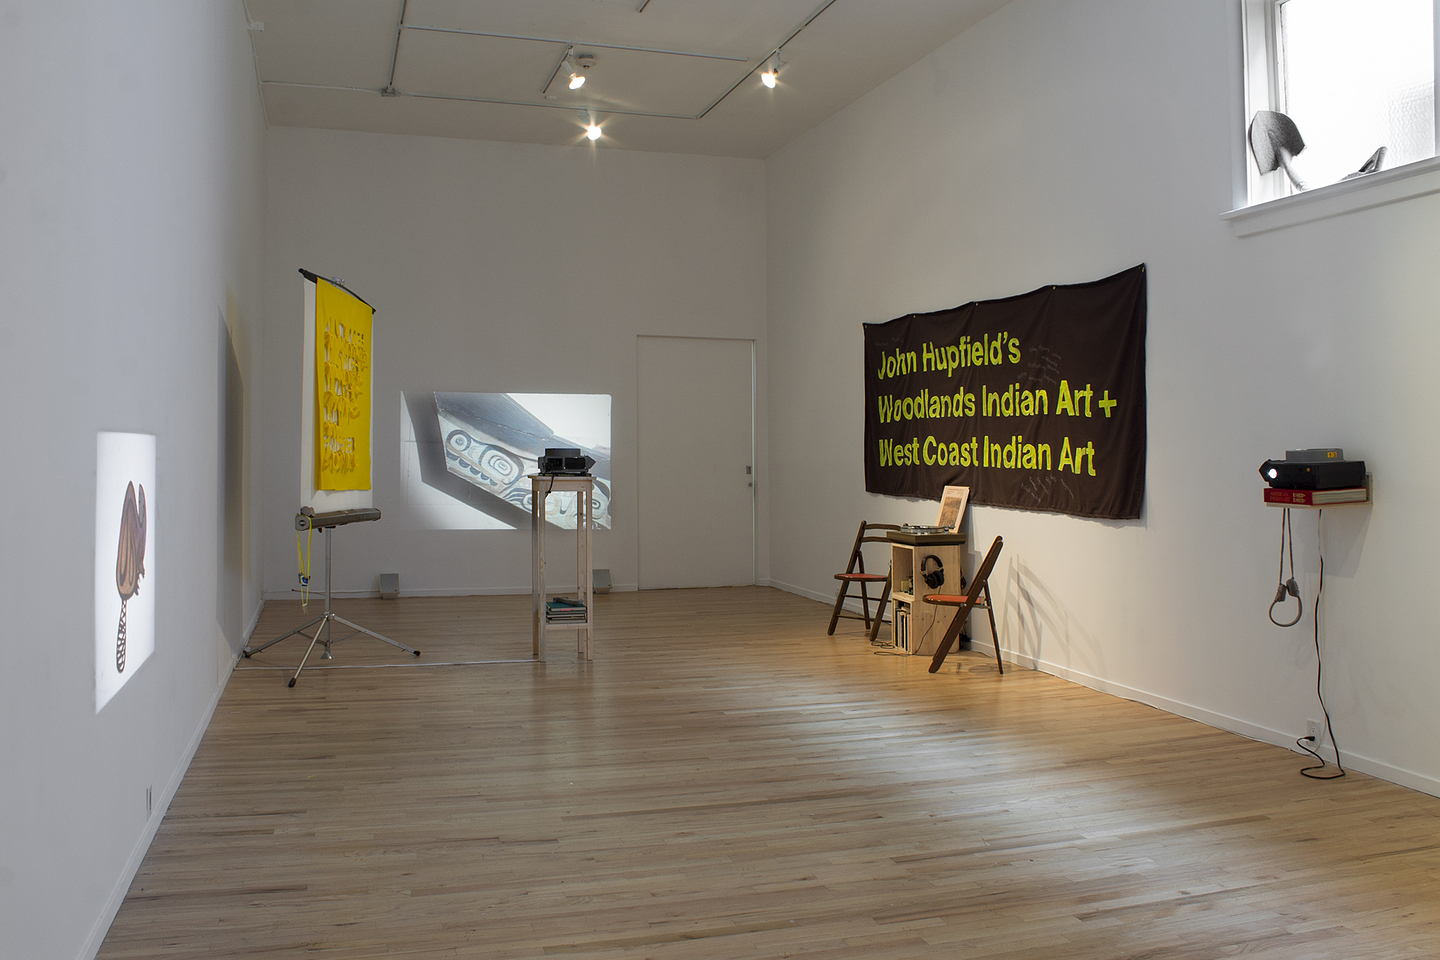 A colour photograph of the interior of Western Front’s gallery and Maria Hupfield’s installation. The exhibition consists of projected images on the north and west walls, a large black banner with yellow type that reads “John Hupfield’s Woodlands Indian Art + West Coast Indian Art” on the east wall, a small podium under the banner upon which sits a turnable, with a collection of records and two folding chairs next to it; and a sculpture that looks like a shovel with the handle bent at a right angle sitting on the windowsill high on the east wall.